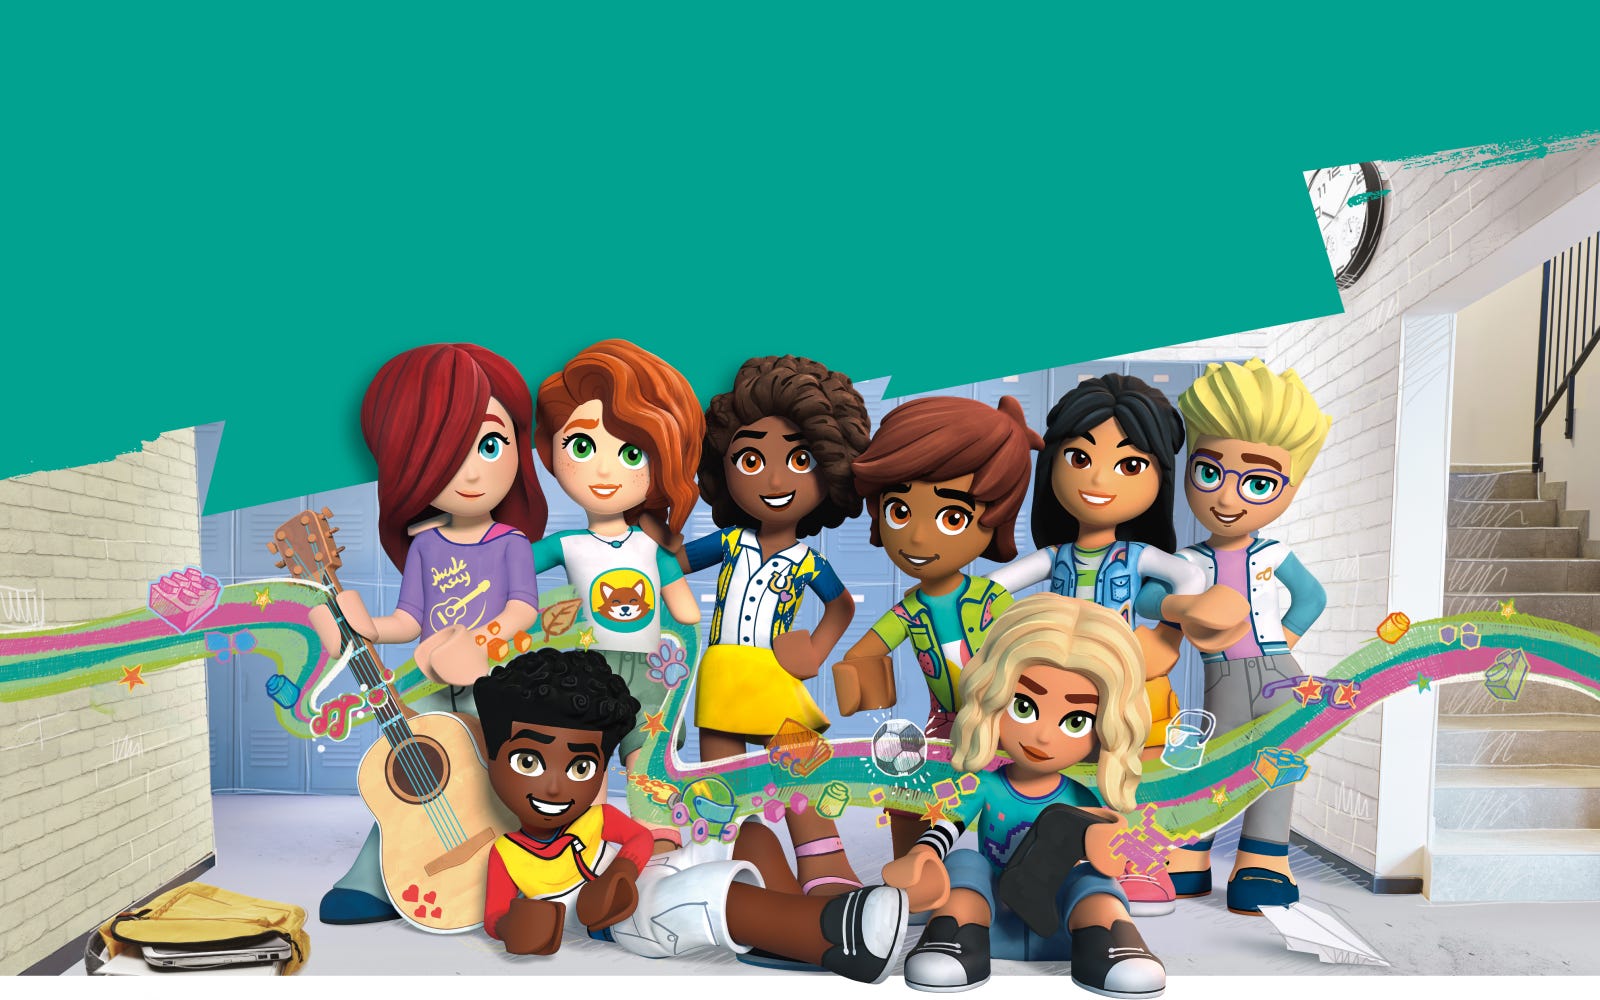 LEGO® Friends Introducing a new world of friends | Official LEGO® Shop GB